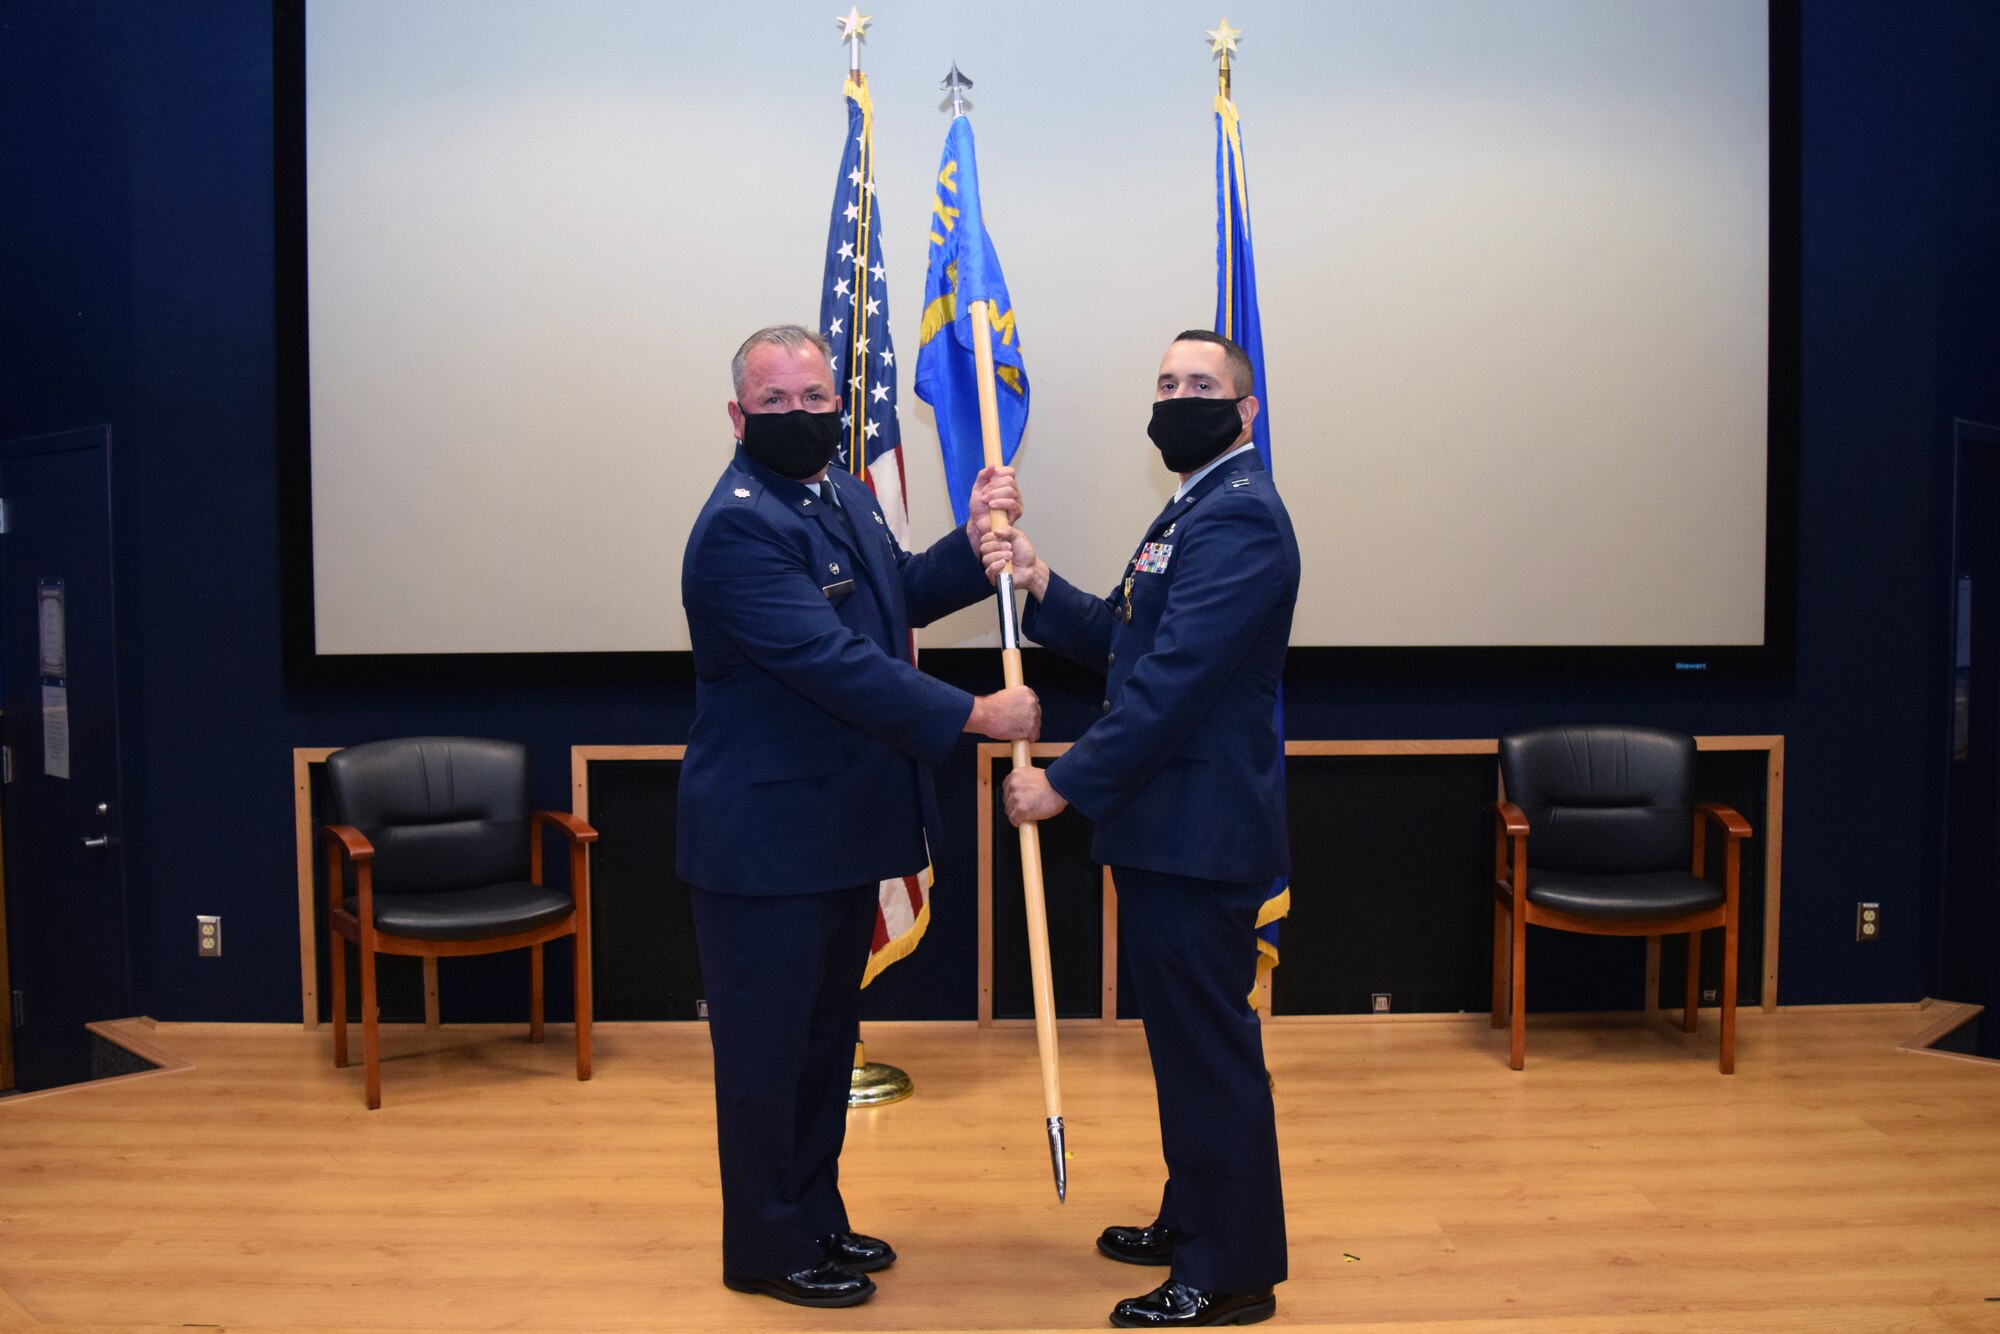 Lt. Col. Stuart Martin, 433rd Maintenance Group commander, presents the guidon to Capt. Nicholas Velazquez, 433rd Maintenance Squadron commander, at an assumption of command ceremony Aug. 8, 2020 at Joint Base San Antonio-Lackland, Texas.